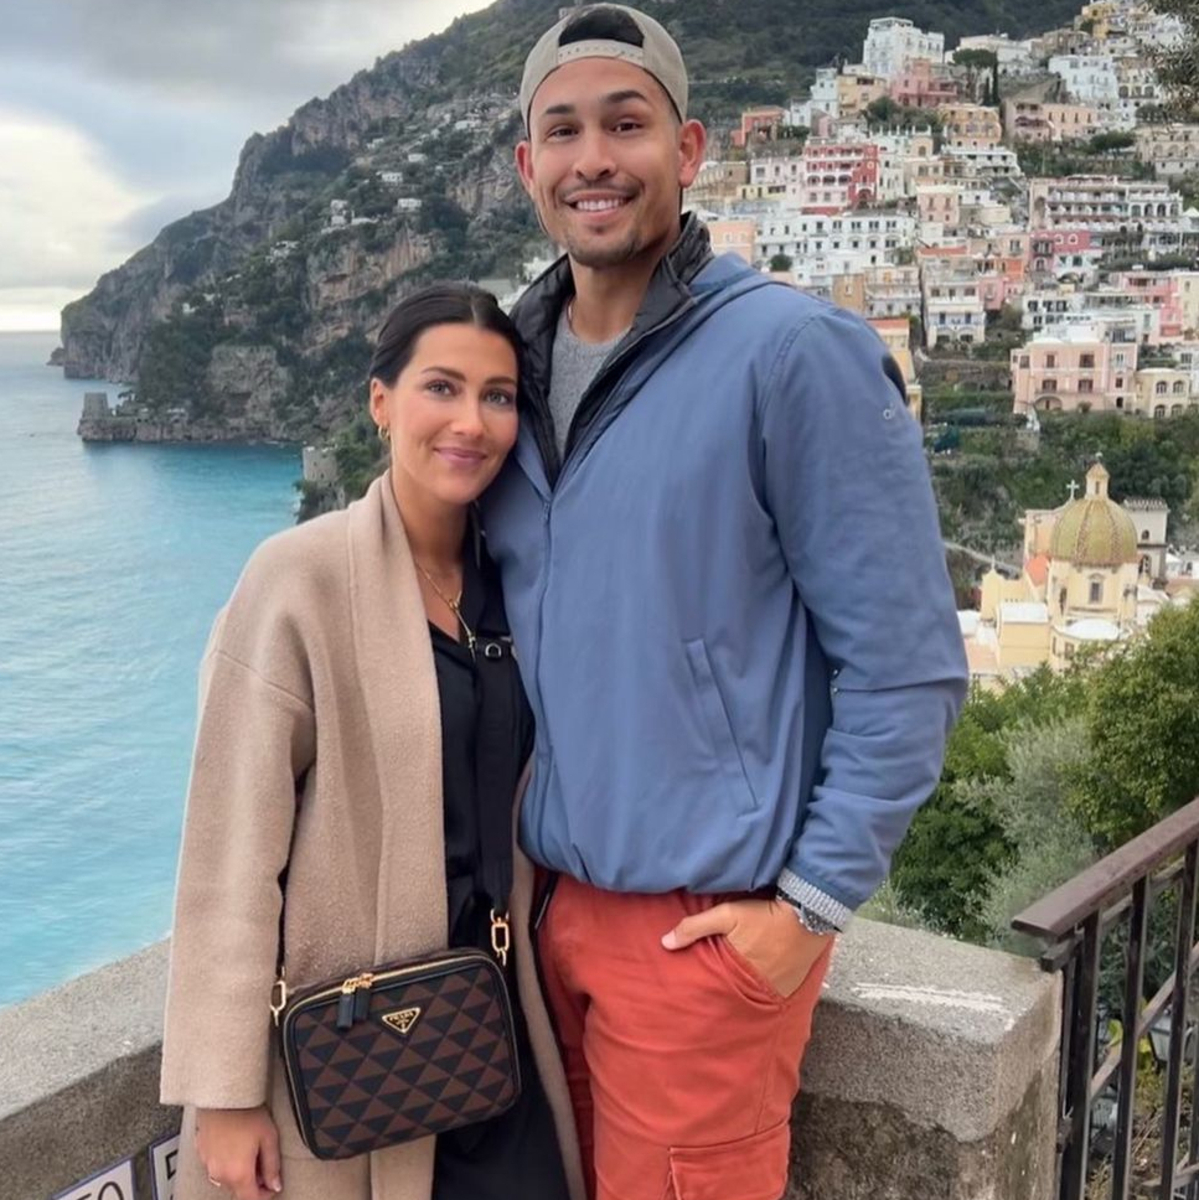 Bachelor Nation’s Becca Kufrin Expecting First Baby With Thomas Jacobs